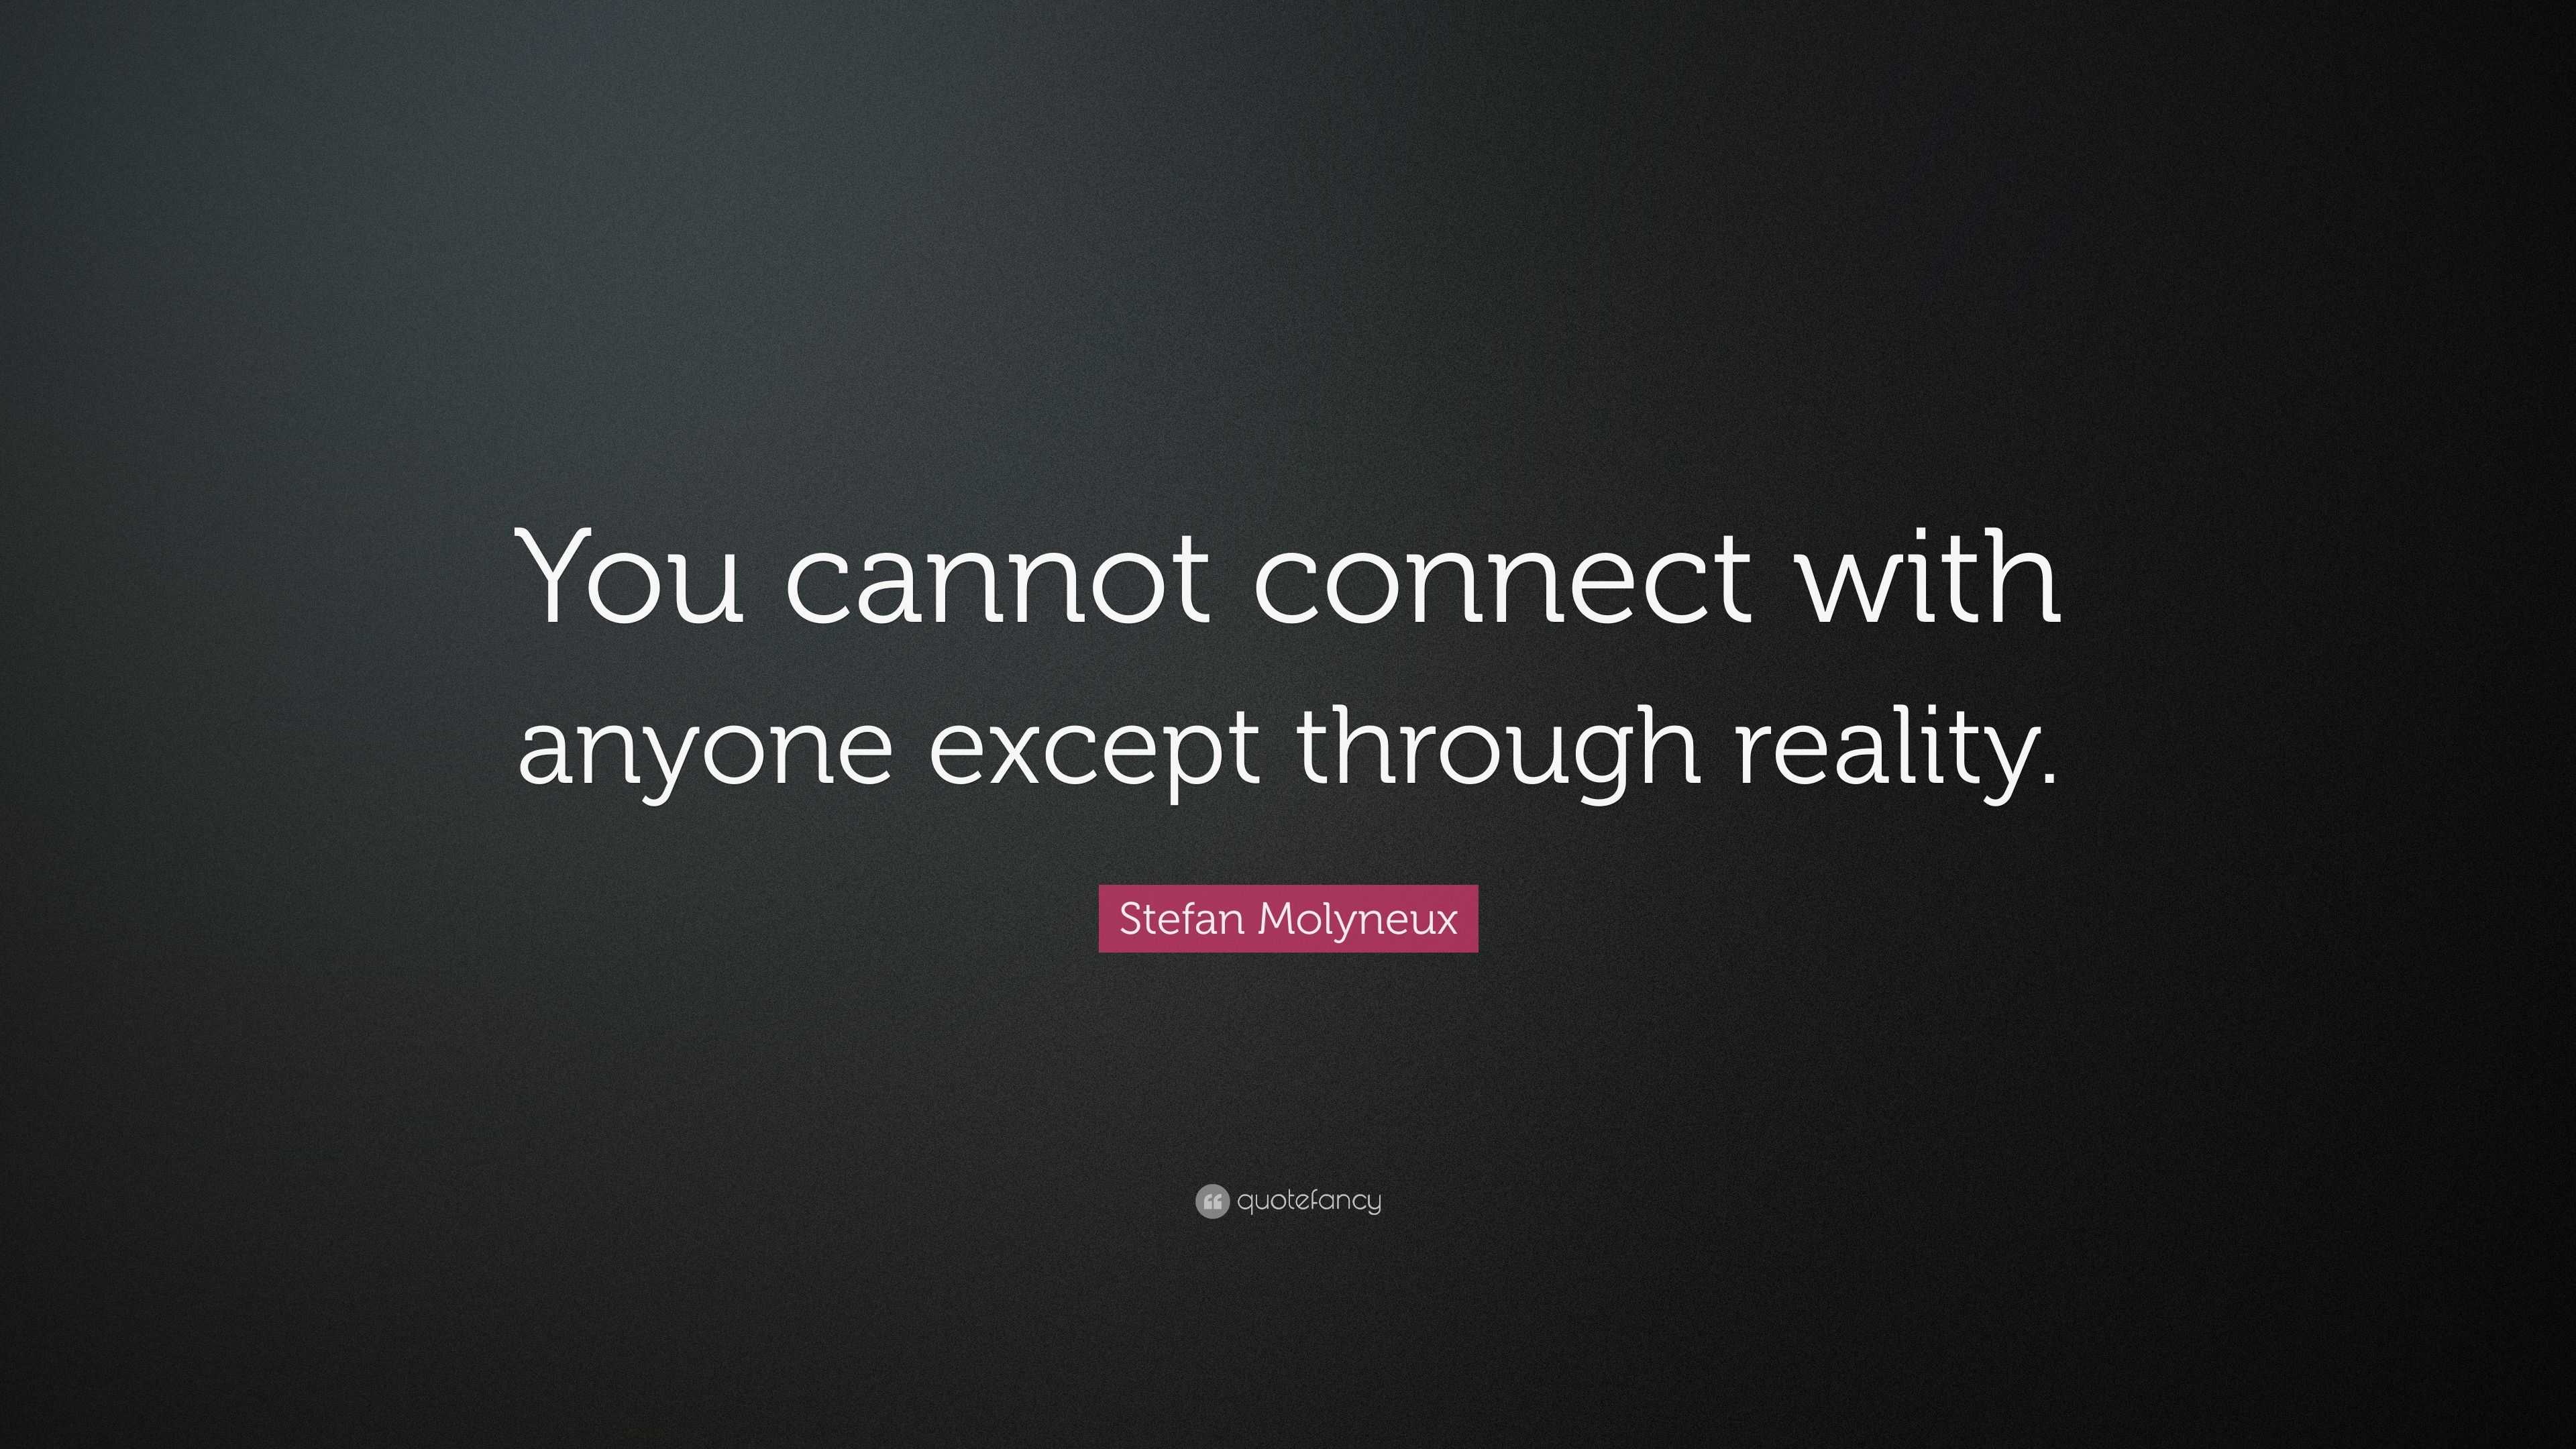 Stefan Molyneux Quote: “You cannot connect with anyone except through